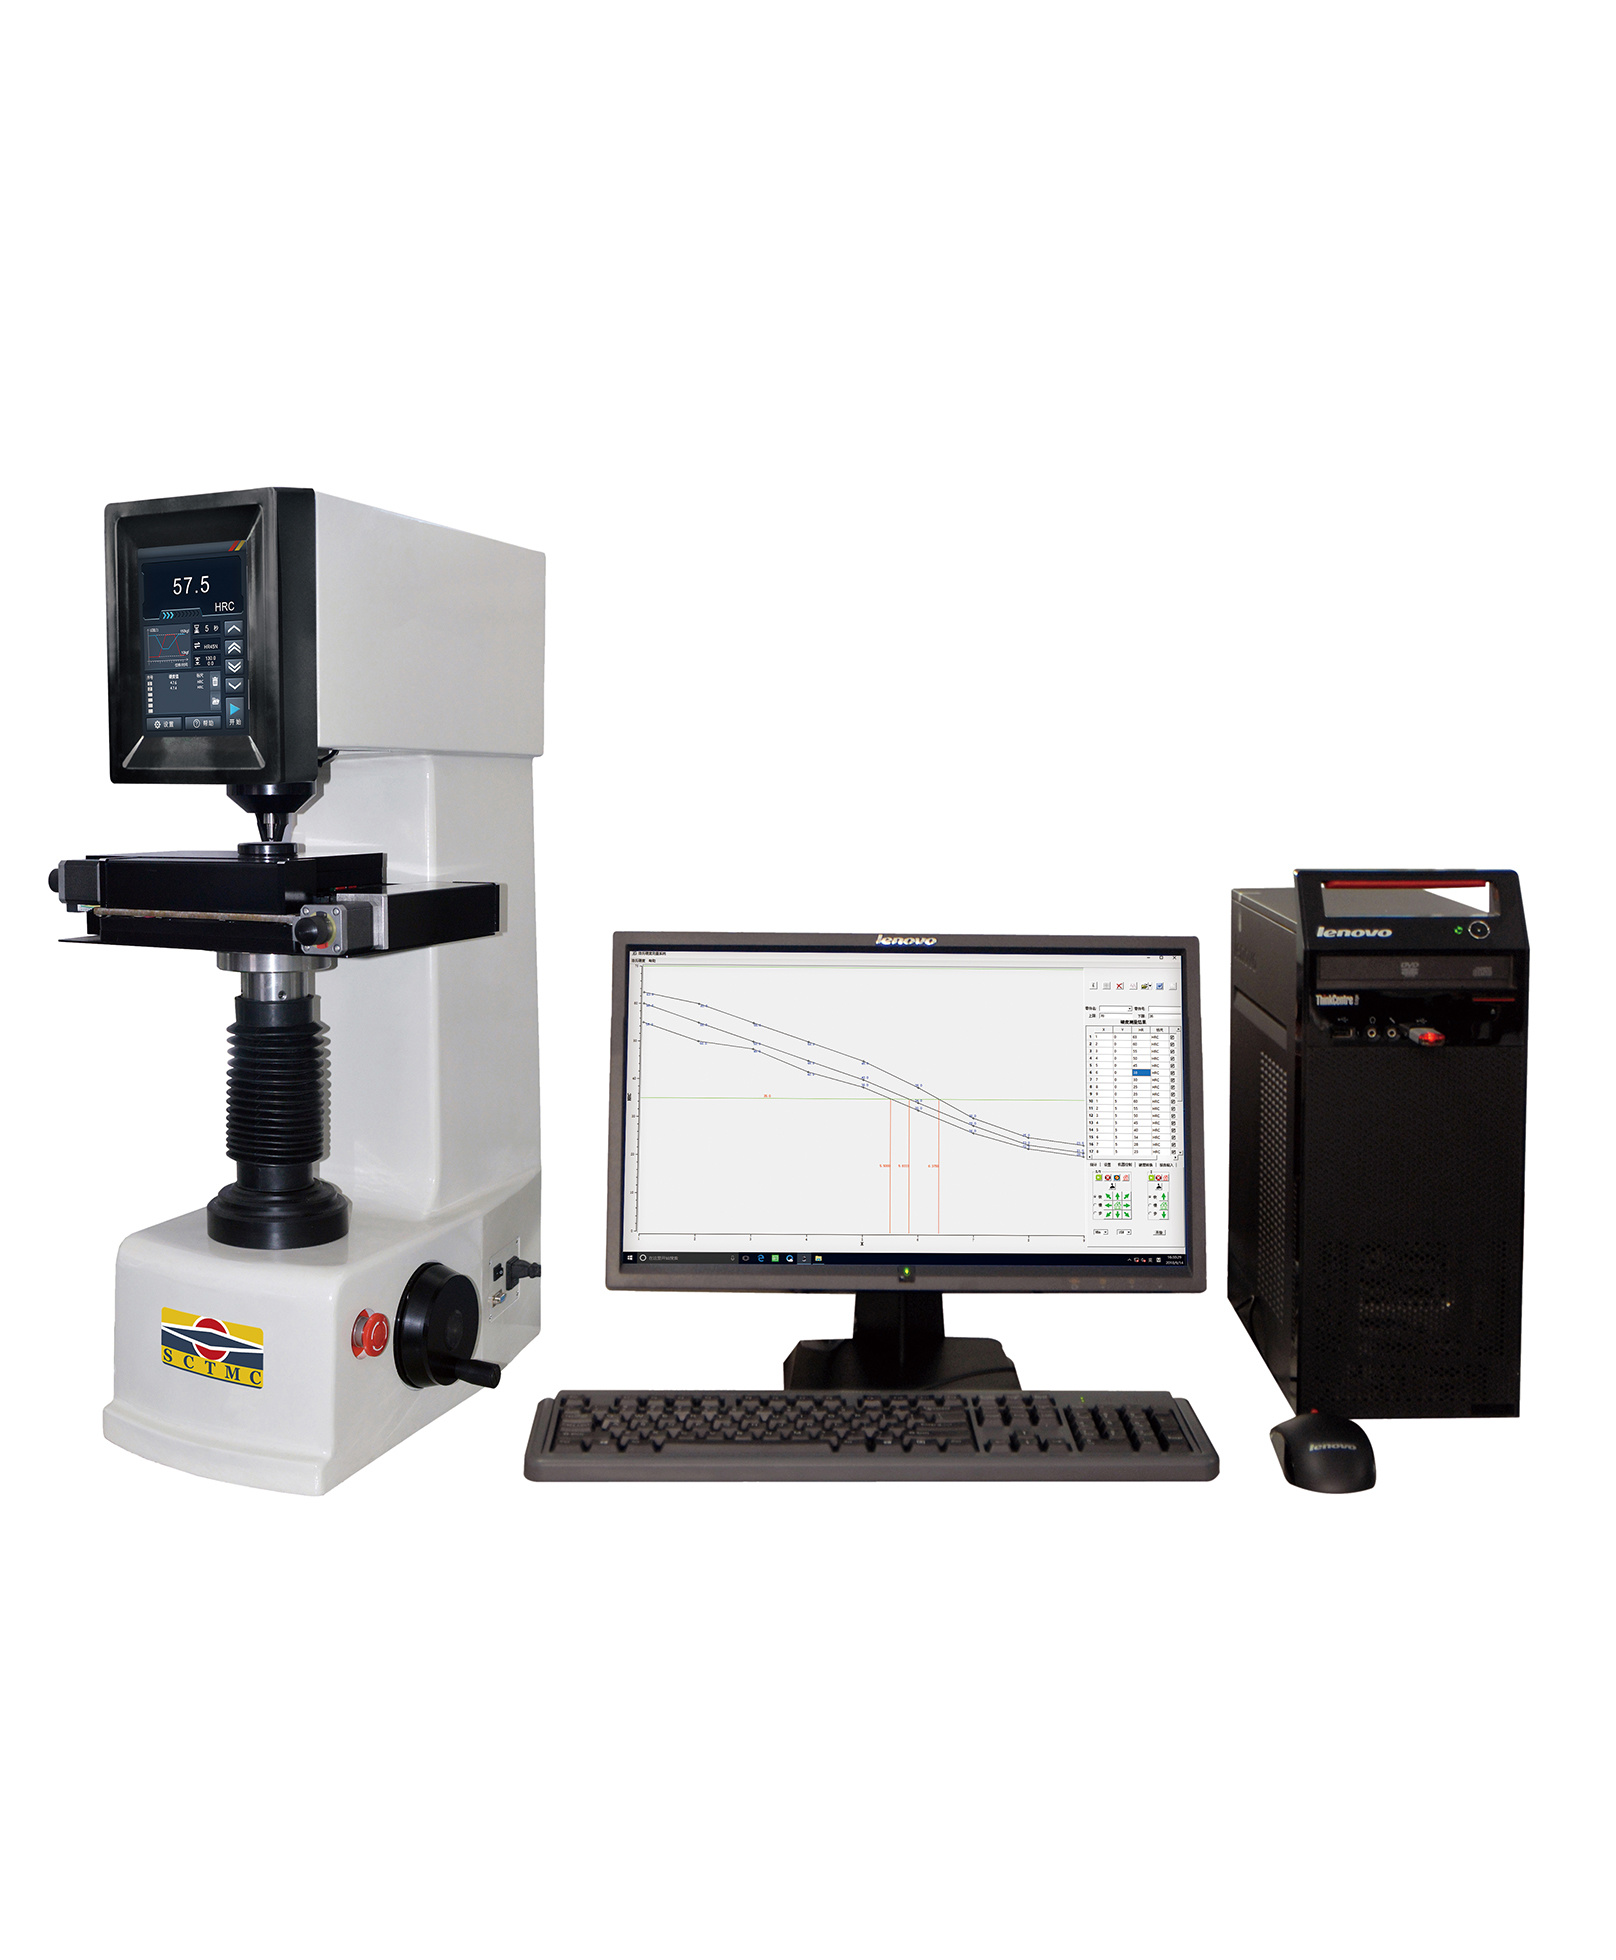 560RSSZ/V3.0 Fully Automatic Rockwell Hardness Tester